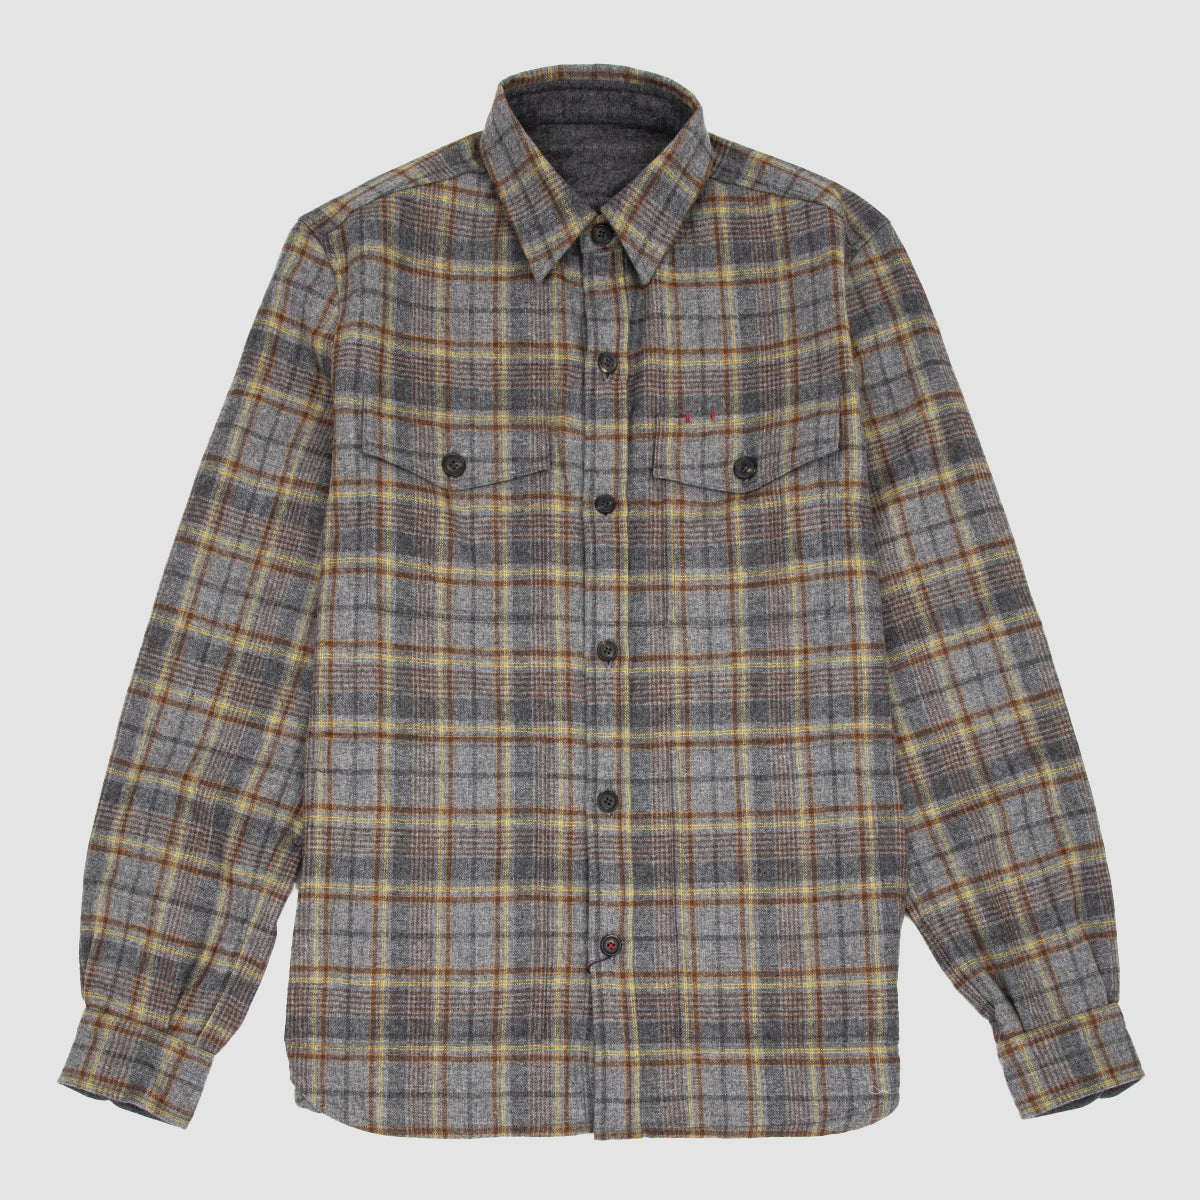 The Overshirt in Grey and Rust Overcheck